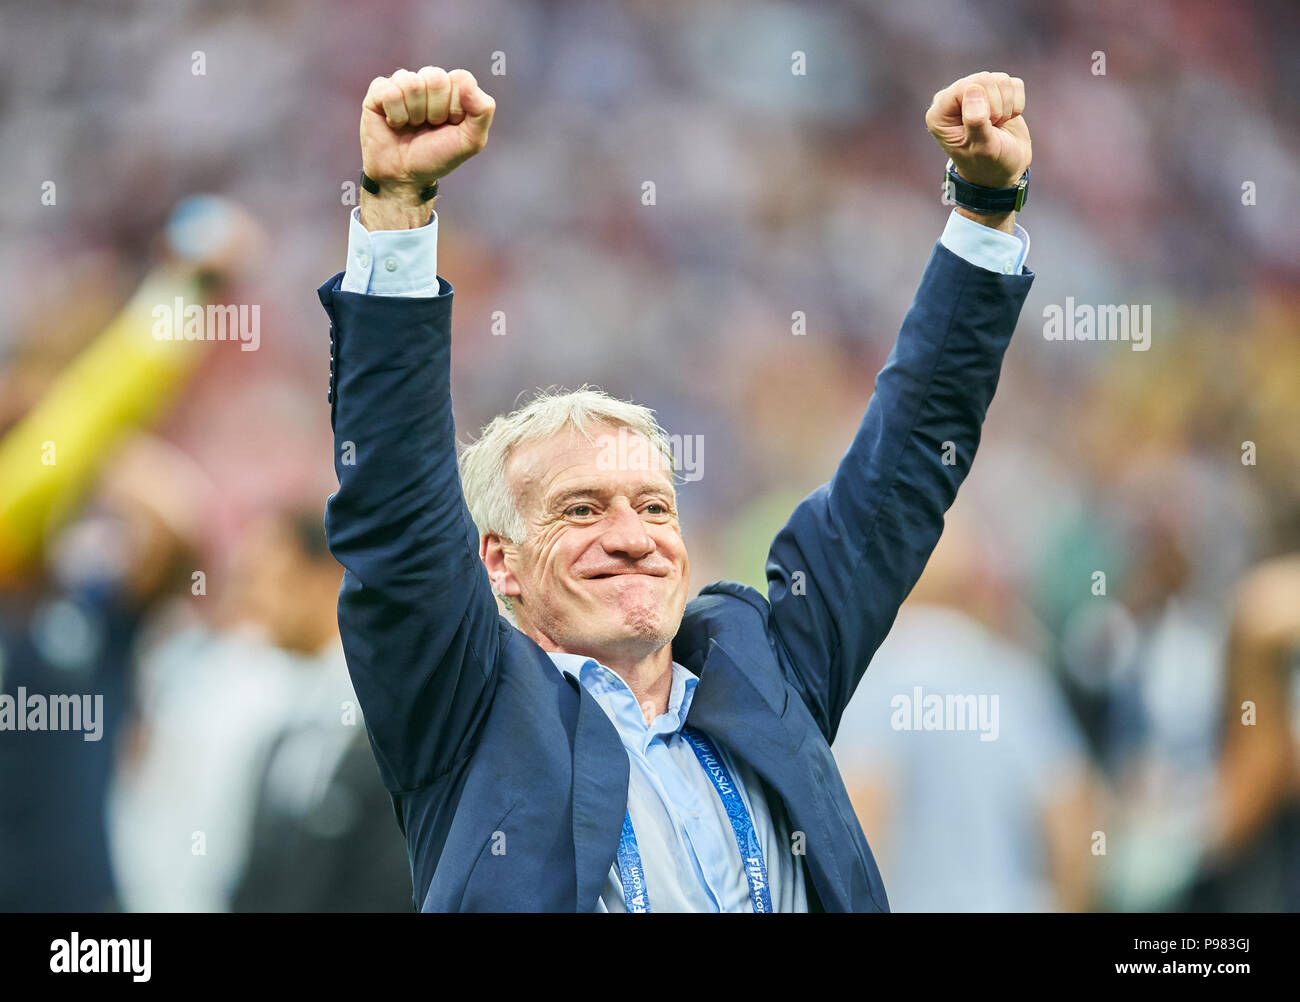 Moscow, Russia. 15th July 2018. France - Croatia, Soccer, Moscow, July 15, 2018 Didier DESCHAMPS, FRA headcoach,  Cheering, joy, emotions, celebrating, laughing, cheering, rejoice, tearing up the arms, clenching the fist,  FRANCE  - CROATIA 4-2 Football FIFA WORLD CUP 2018 RUSSIA, Final, Season 2018/2019,  July 15, 2018 in Luzhniki Stadium Moscow, Russia. © Peter Schatz / Alamy Live News Stock Photo